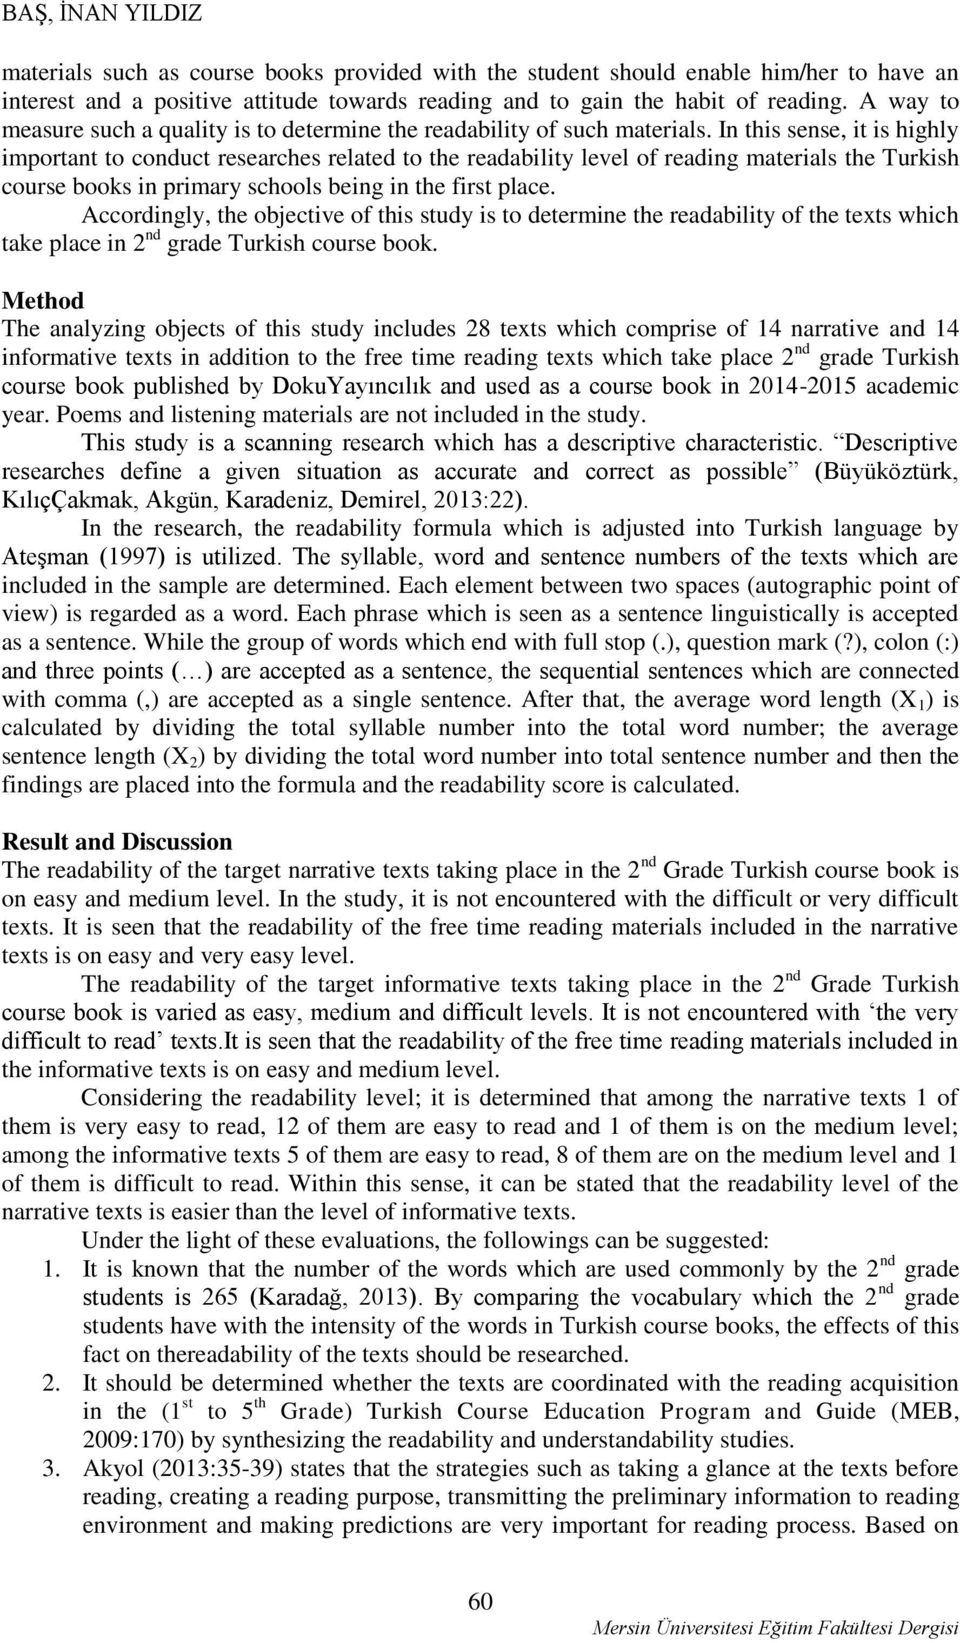 In this sense, it is highly important to conduct researches related to the readability level of reading materials the Turkish course books in primary schools being in the first place.